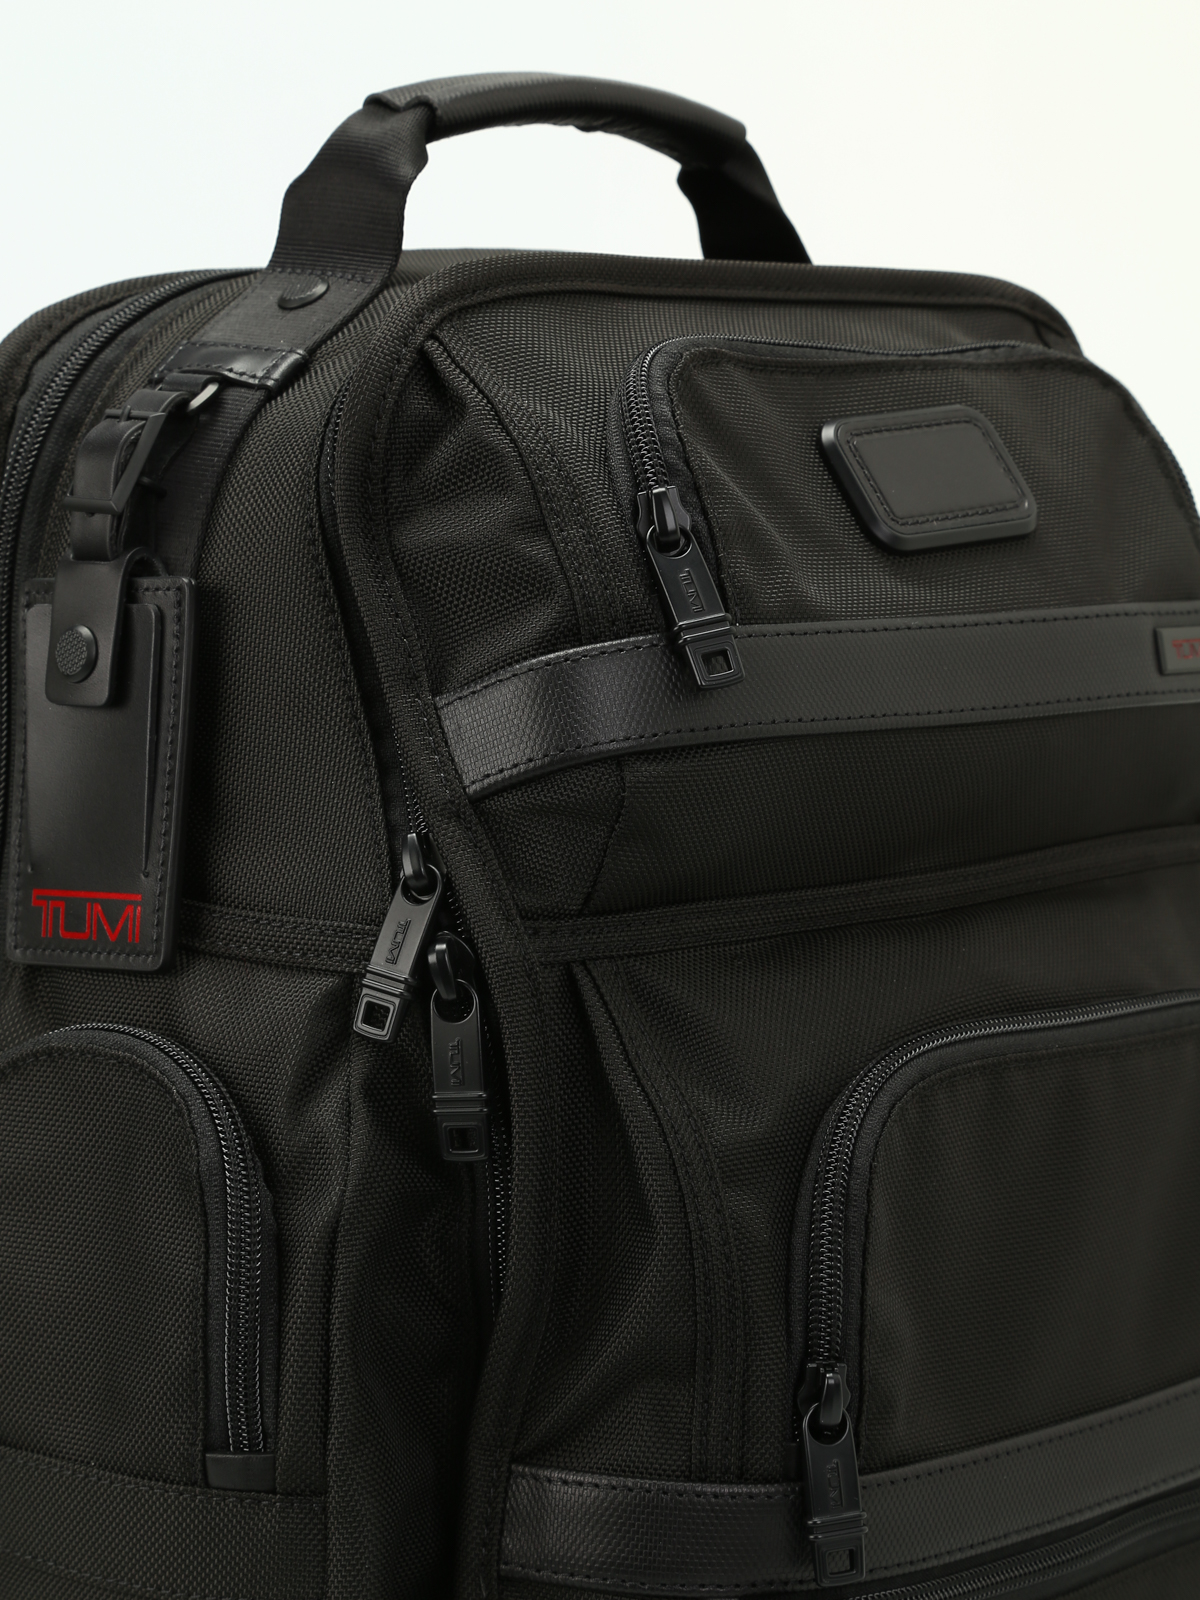 Best Laptop Bags For Business Travel Tumi | IQS Executive